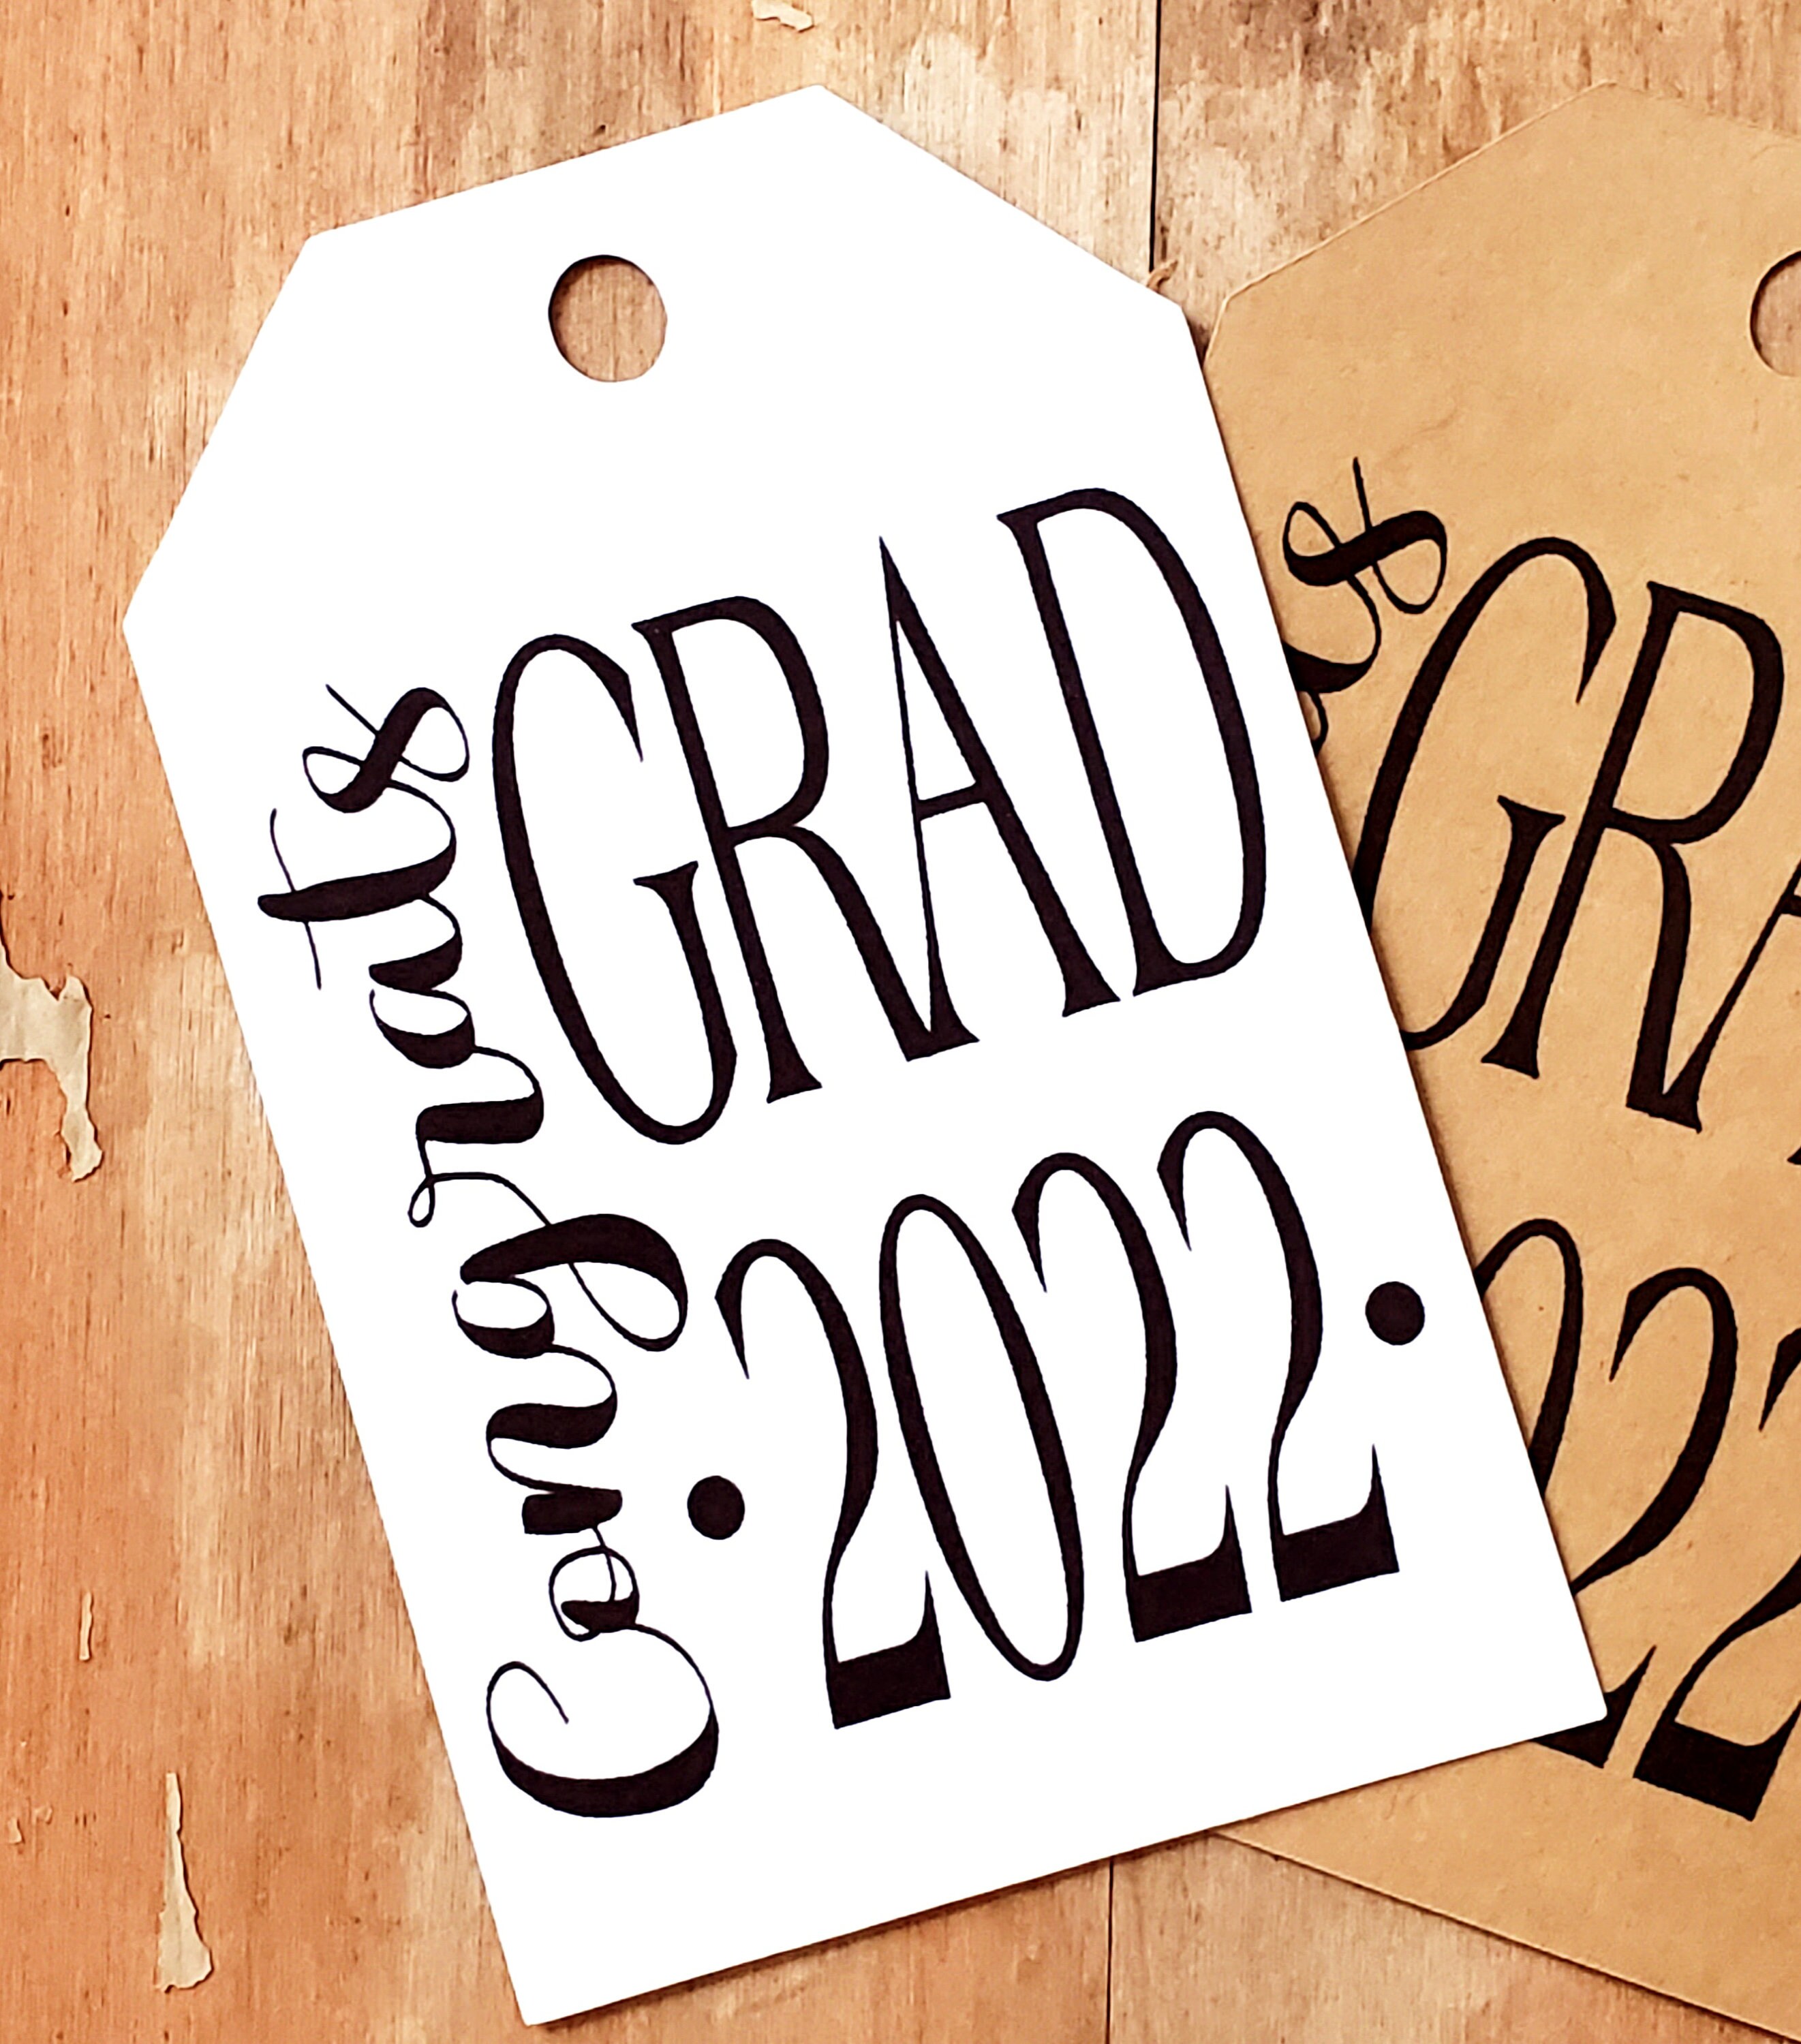 2022 tag 2022 diecut Table Numbers 2021 cut outs Graduation | Etsy